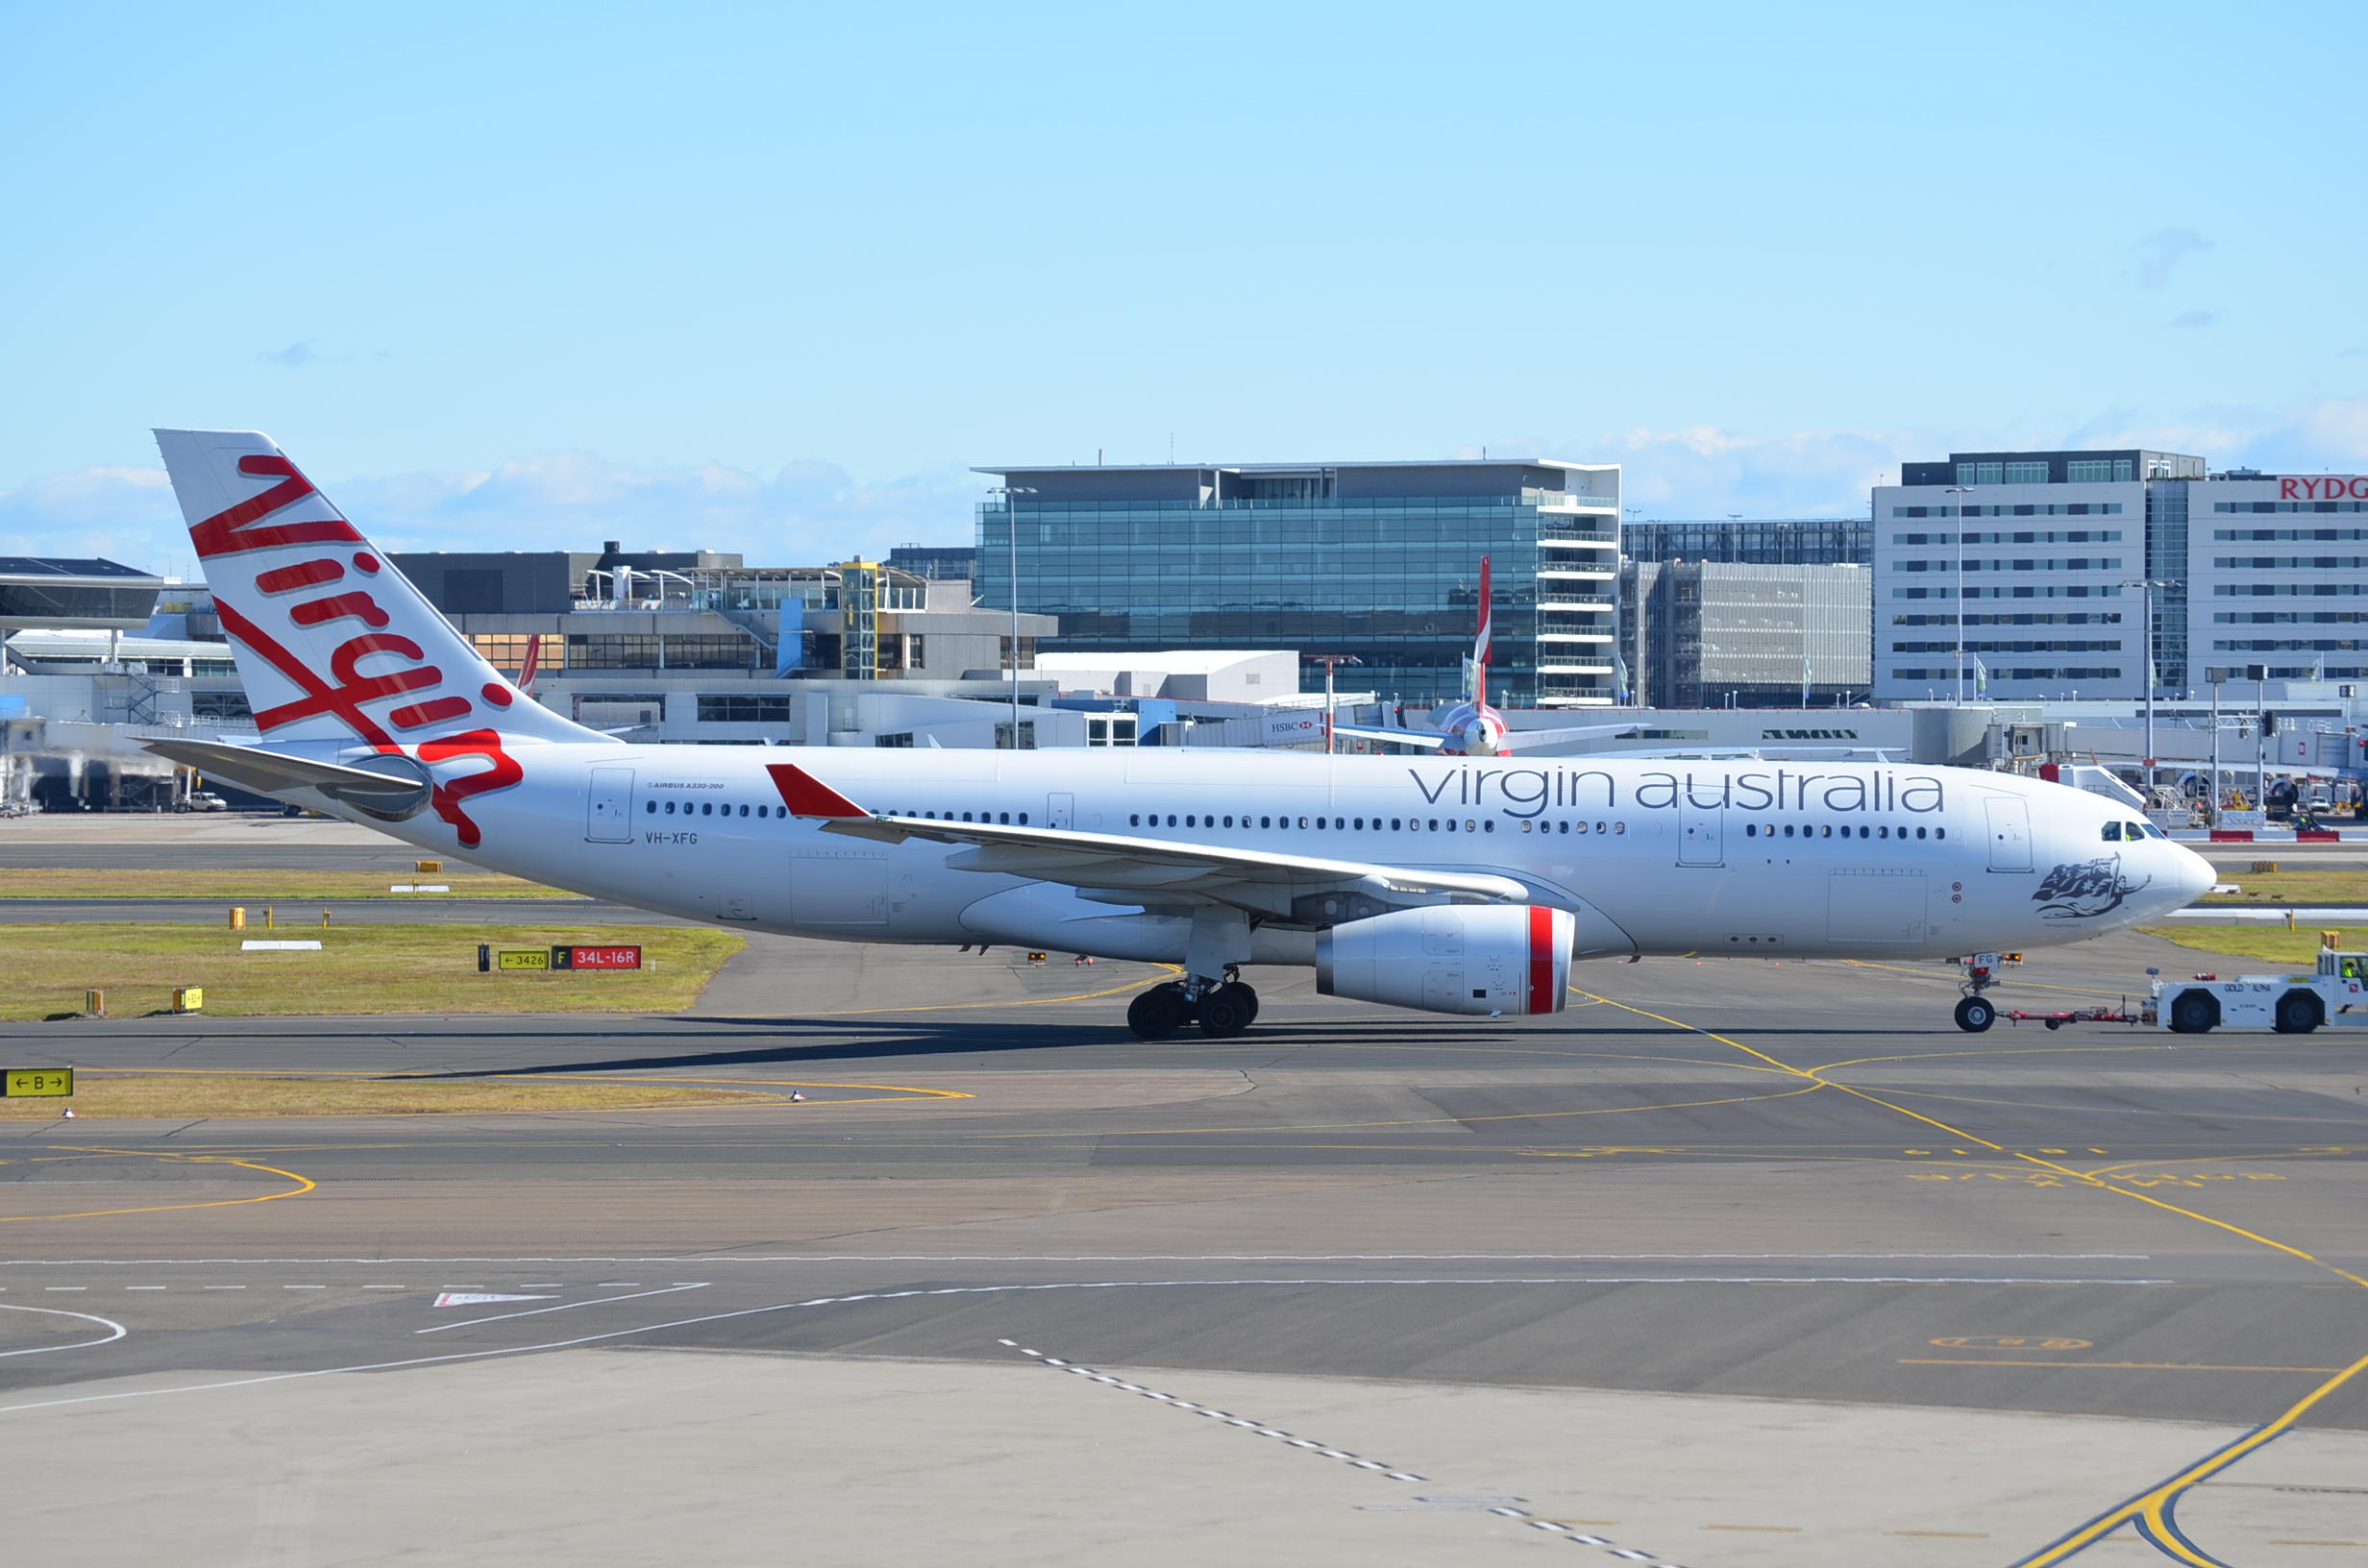 Airbus Airbus A330 Aircraft Airplane Airport Sydney 2464x1632